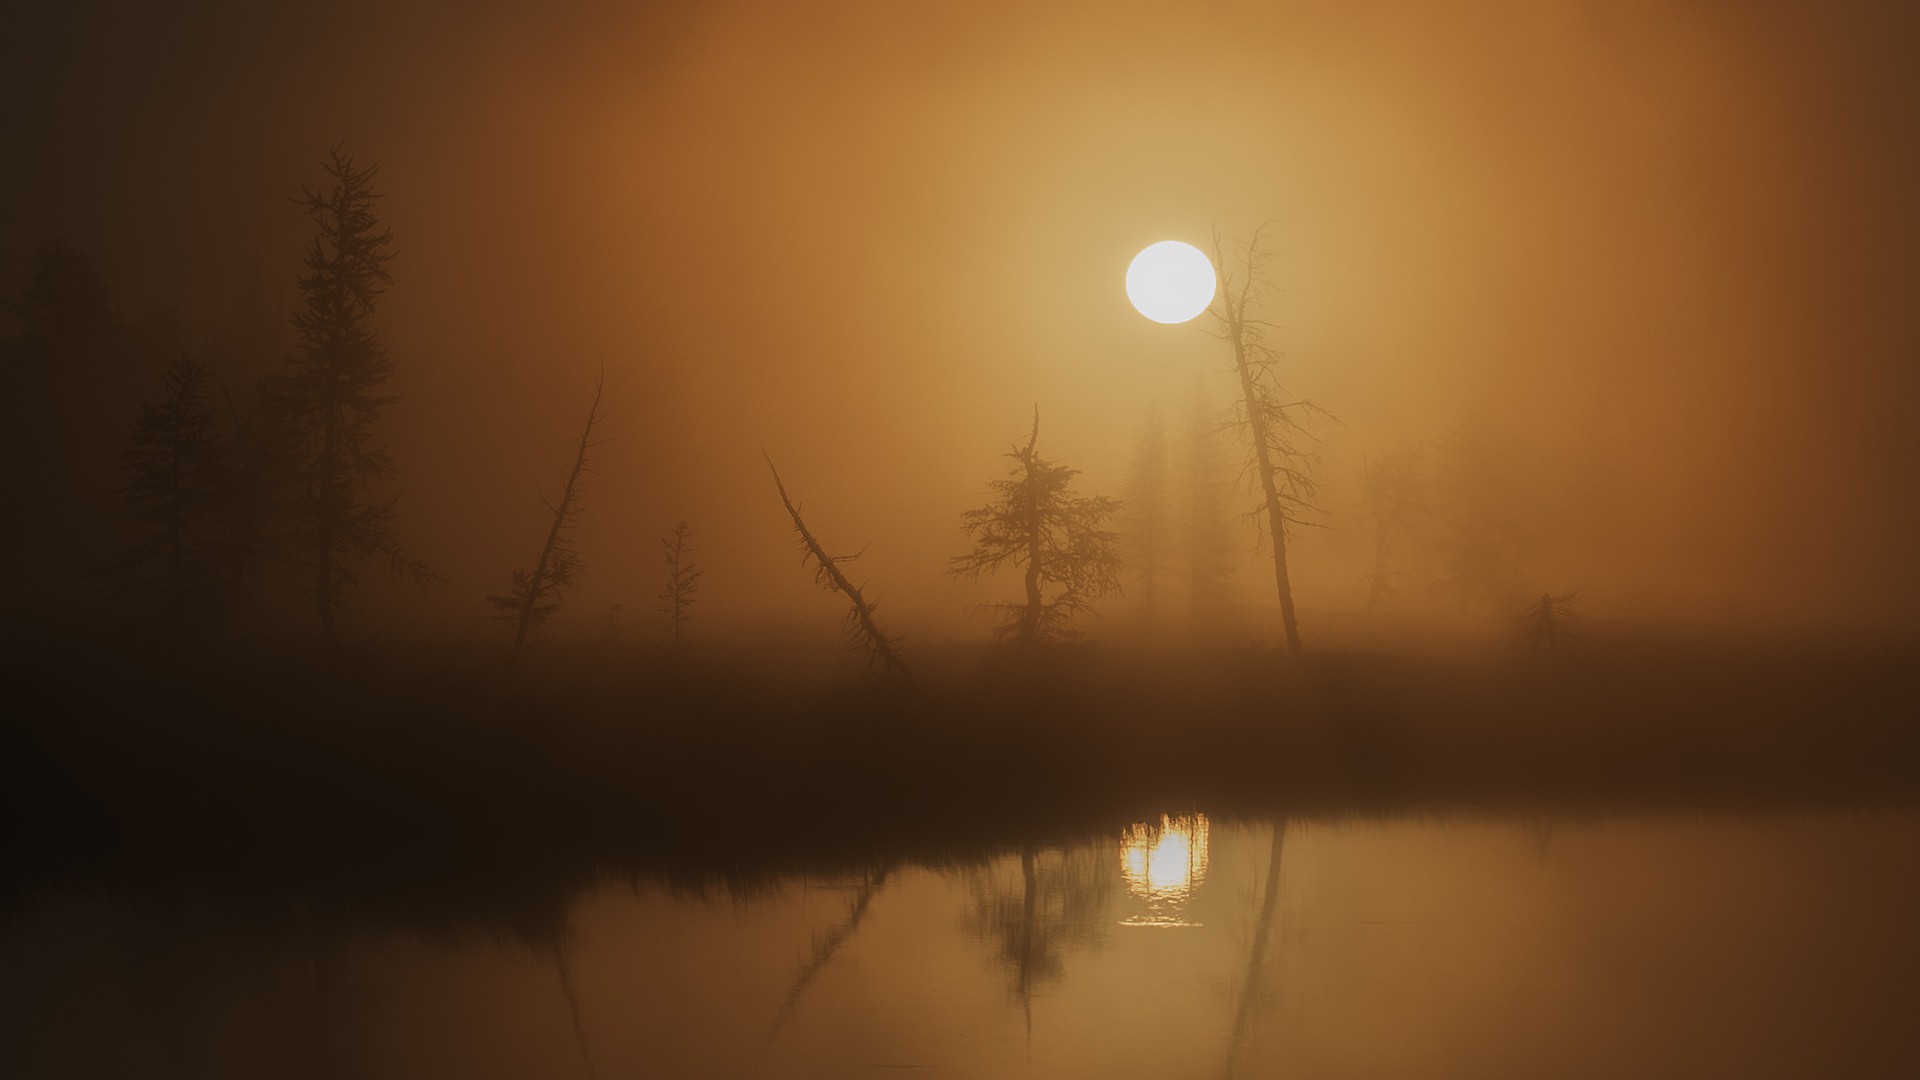 General 1920x1080 nature landscape trees mist blurred Sun water lake reflection silhouette